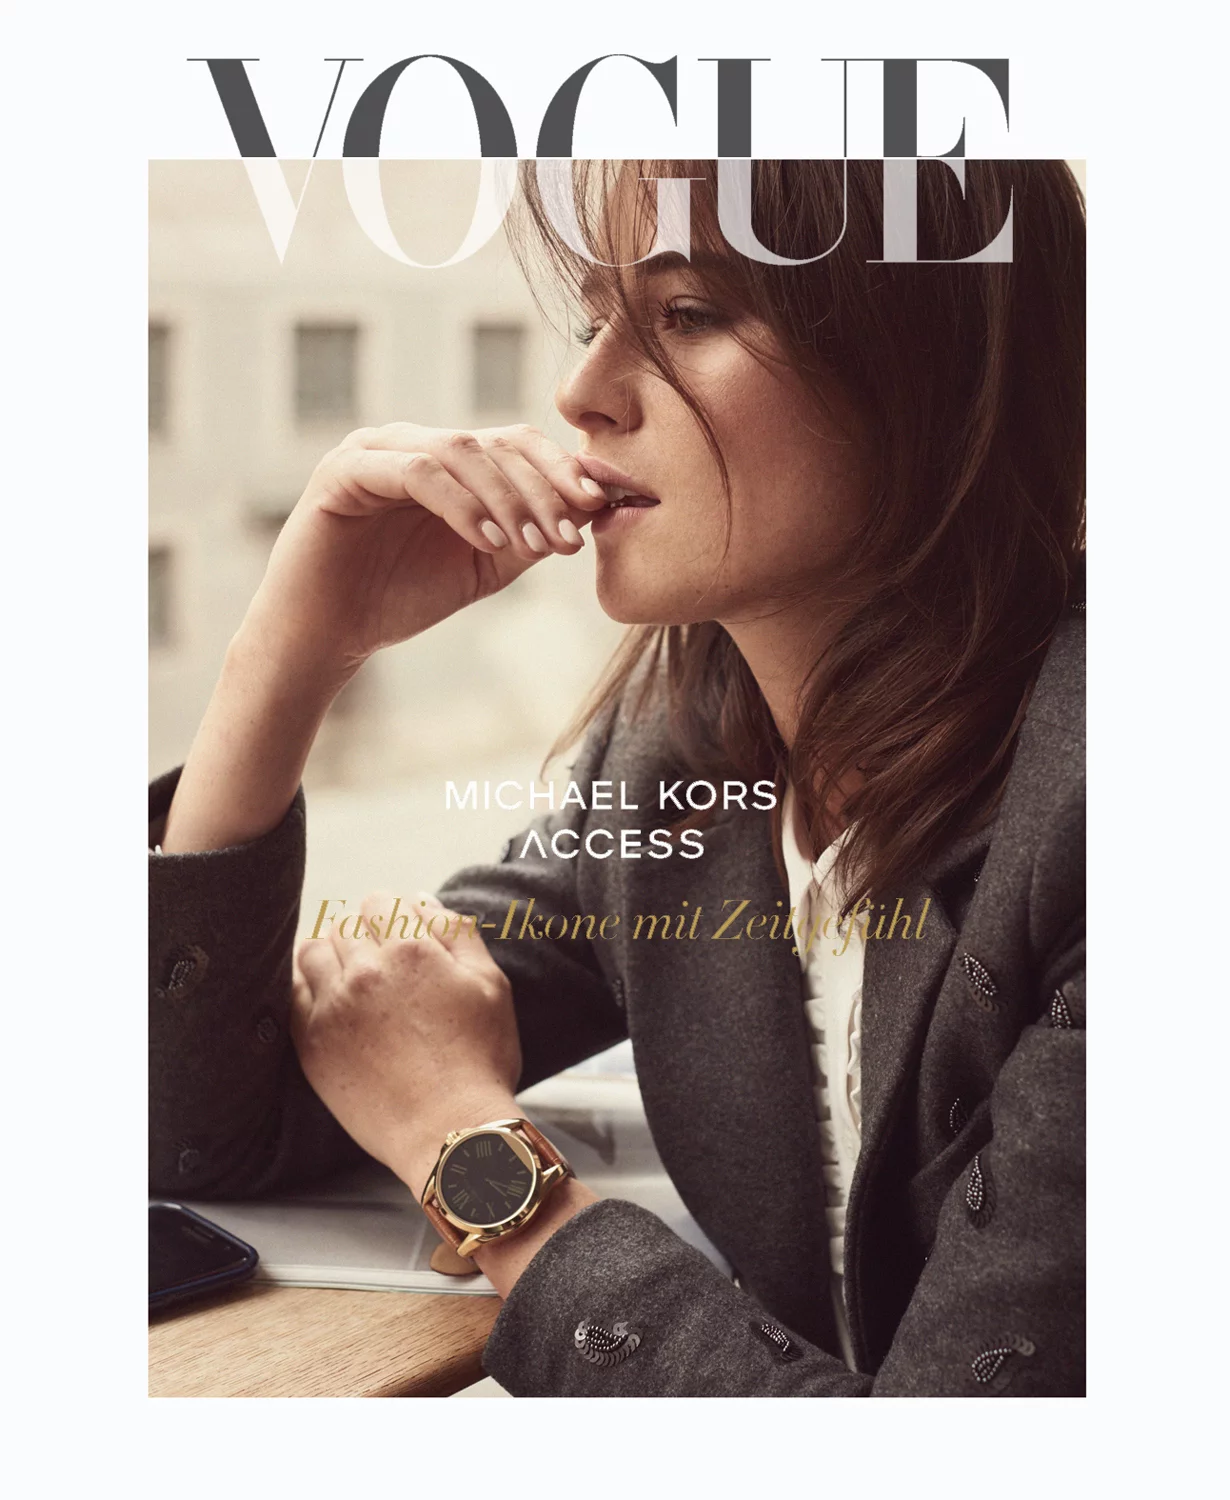 Vogue Promo Michael Kors Access 1 by Andreas ORTNER